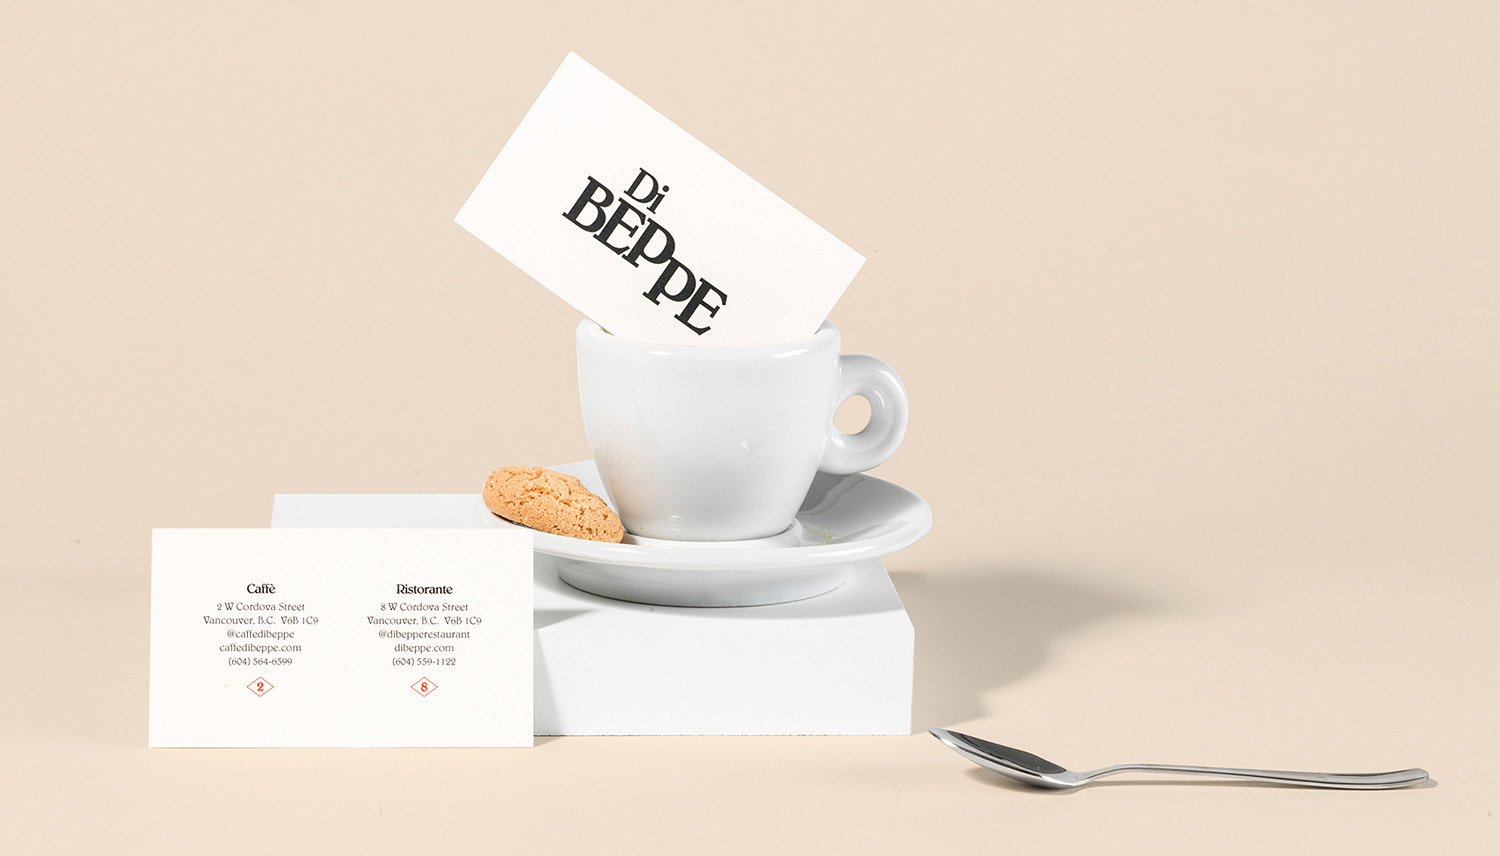 Logotype and print by Glasfurd & Walker for Italian caffé and ristorante Di Beppe